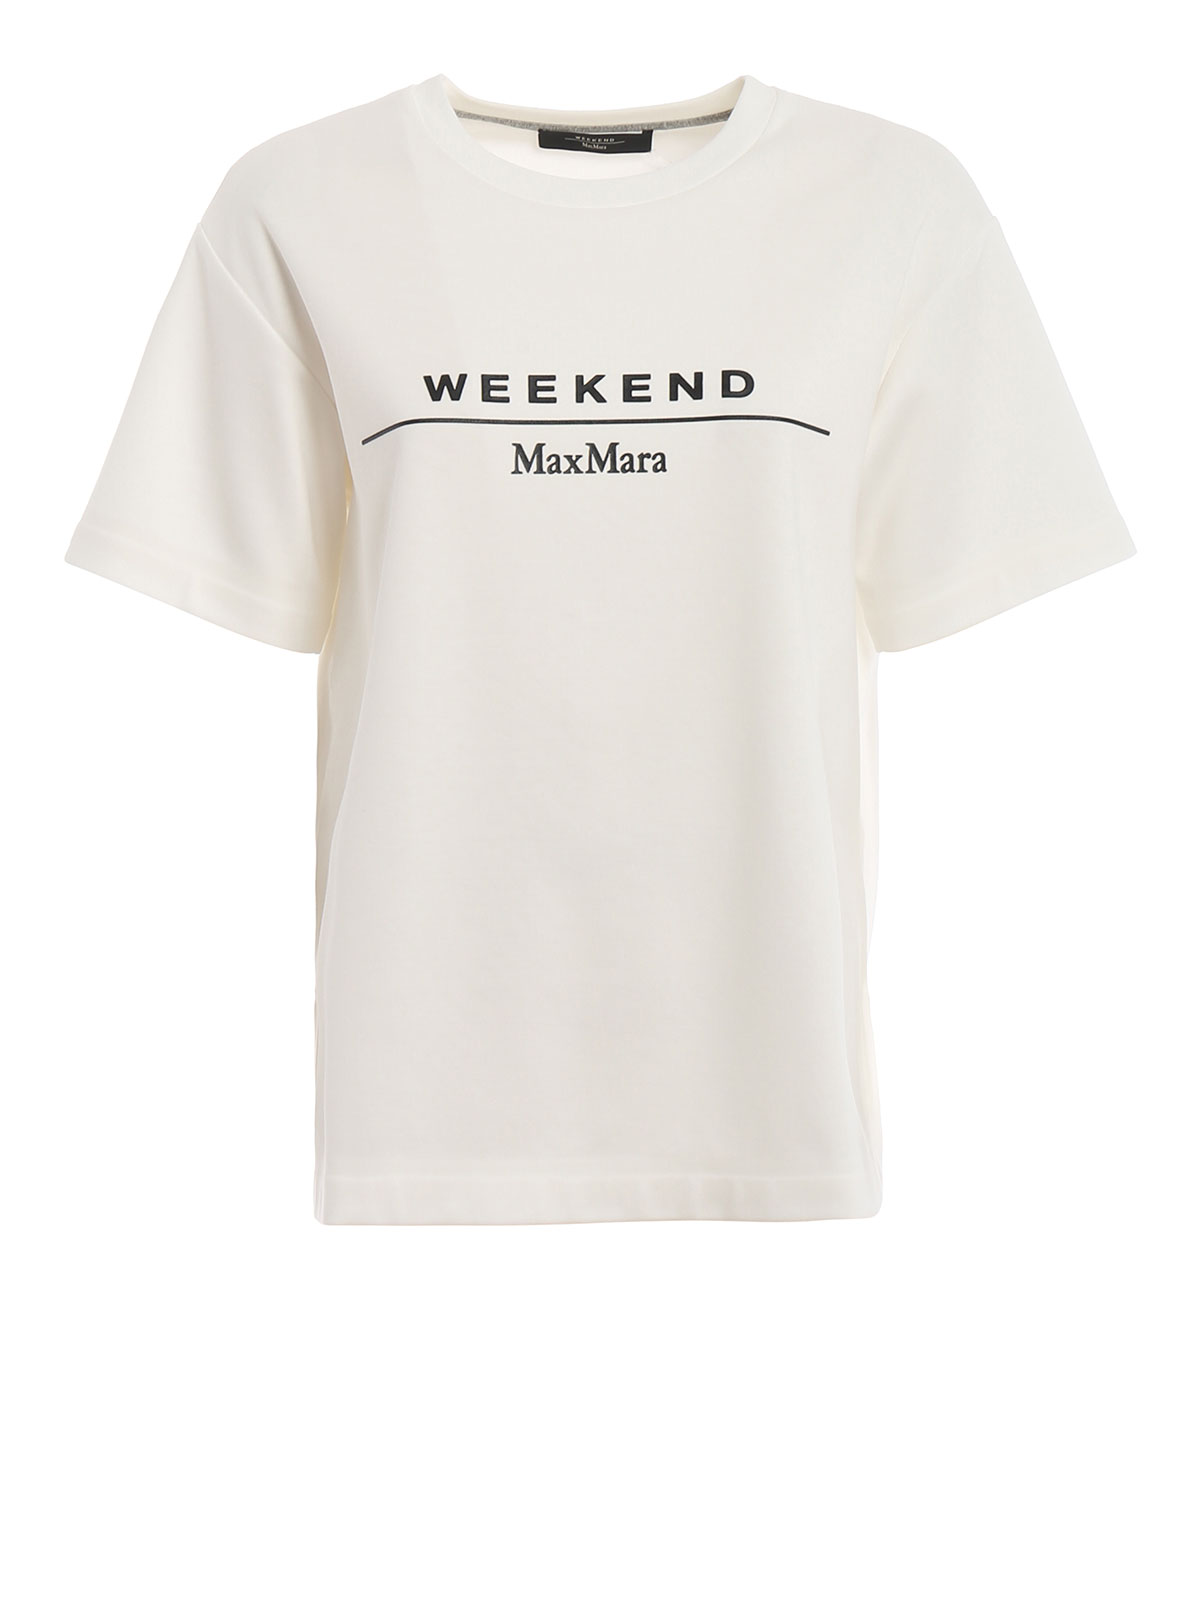 fuego cepillo Colonos Max Mara Weekend T Shirts Online Shop, UP TO 50% OFF | www.apmusicales.com